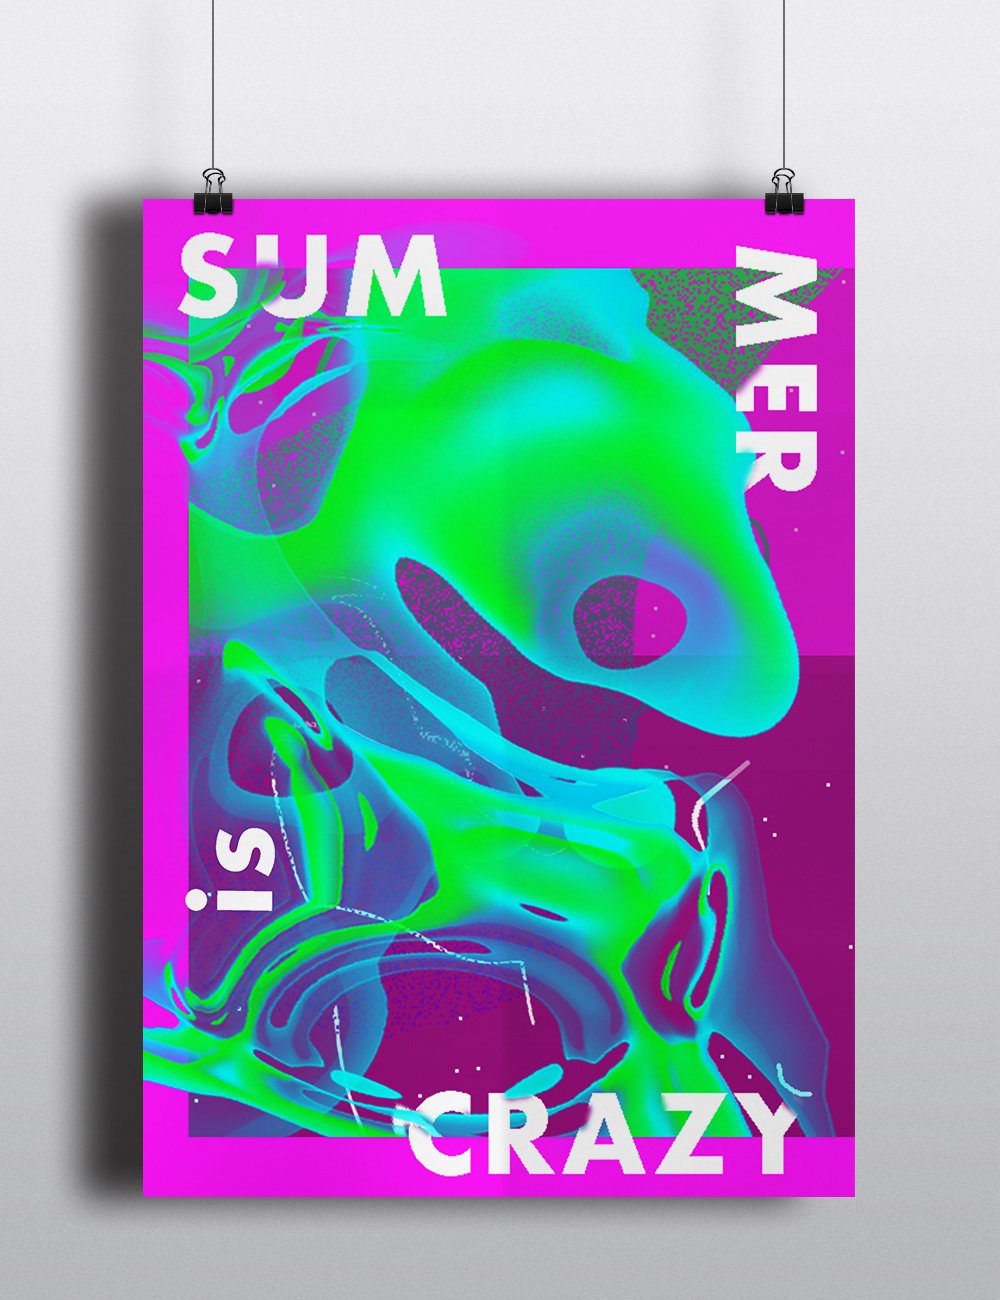 ABSTRACT POSTER